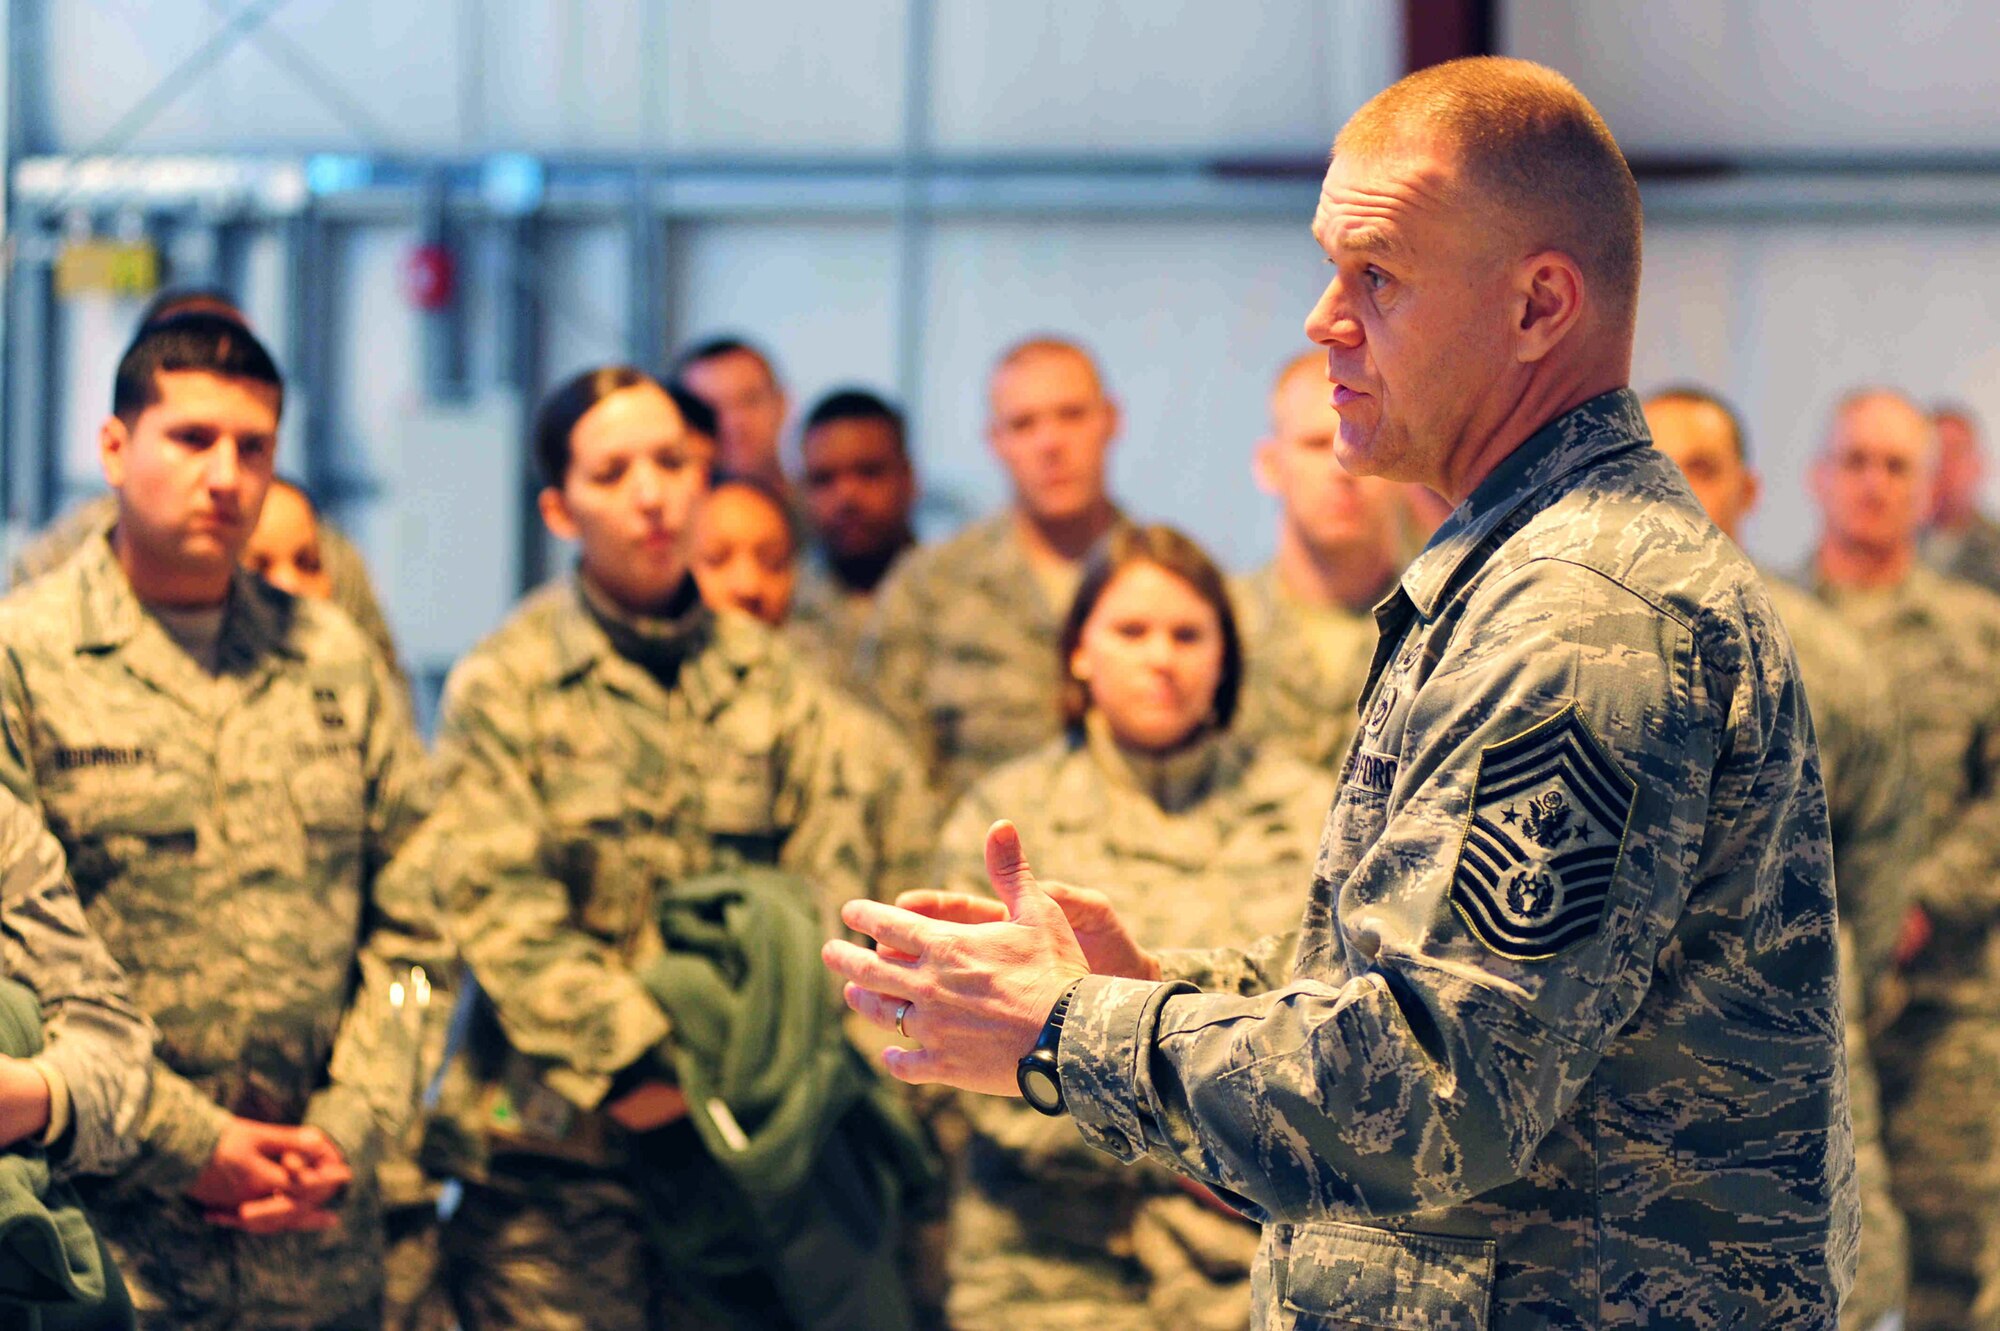 Chief Master Sgt. of the Air Force James A. Roy speaks at an Airman's Call Nov. 27, 2009, at the Transit Center at Manas, Kyrgyzstan. (U.S. Air Force photo/Senior Airman Steele C. G. Britton)